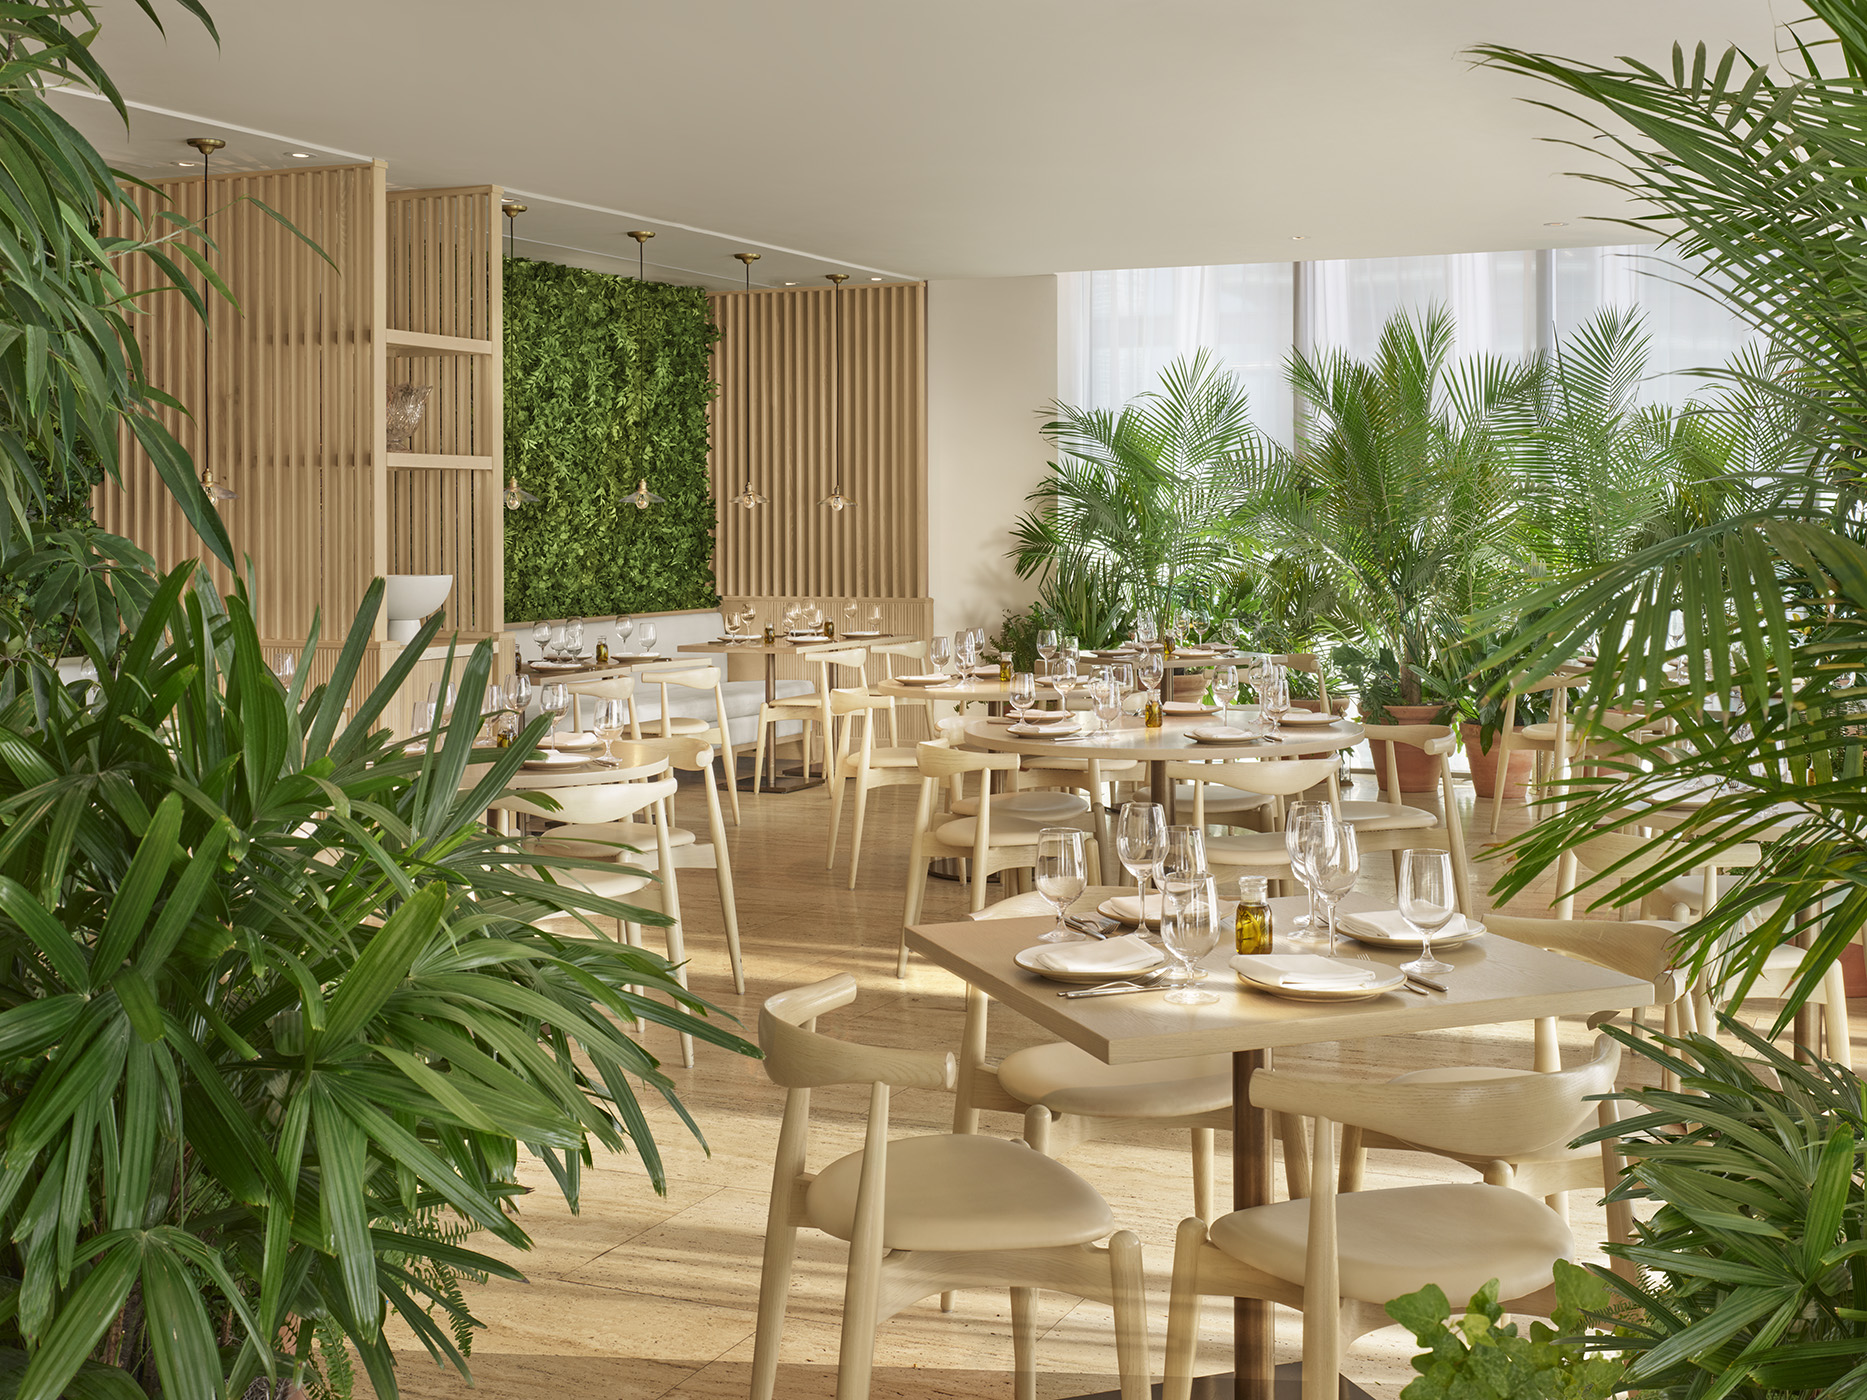 Dining room of restaurant with potted palms